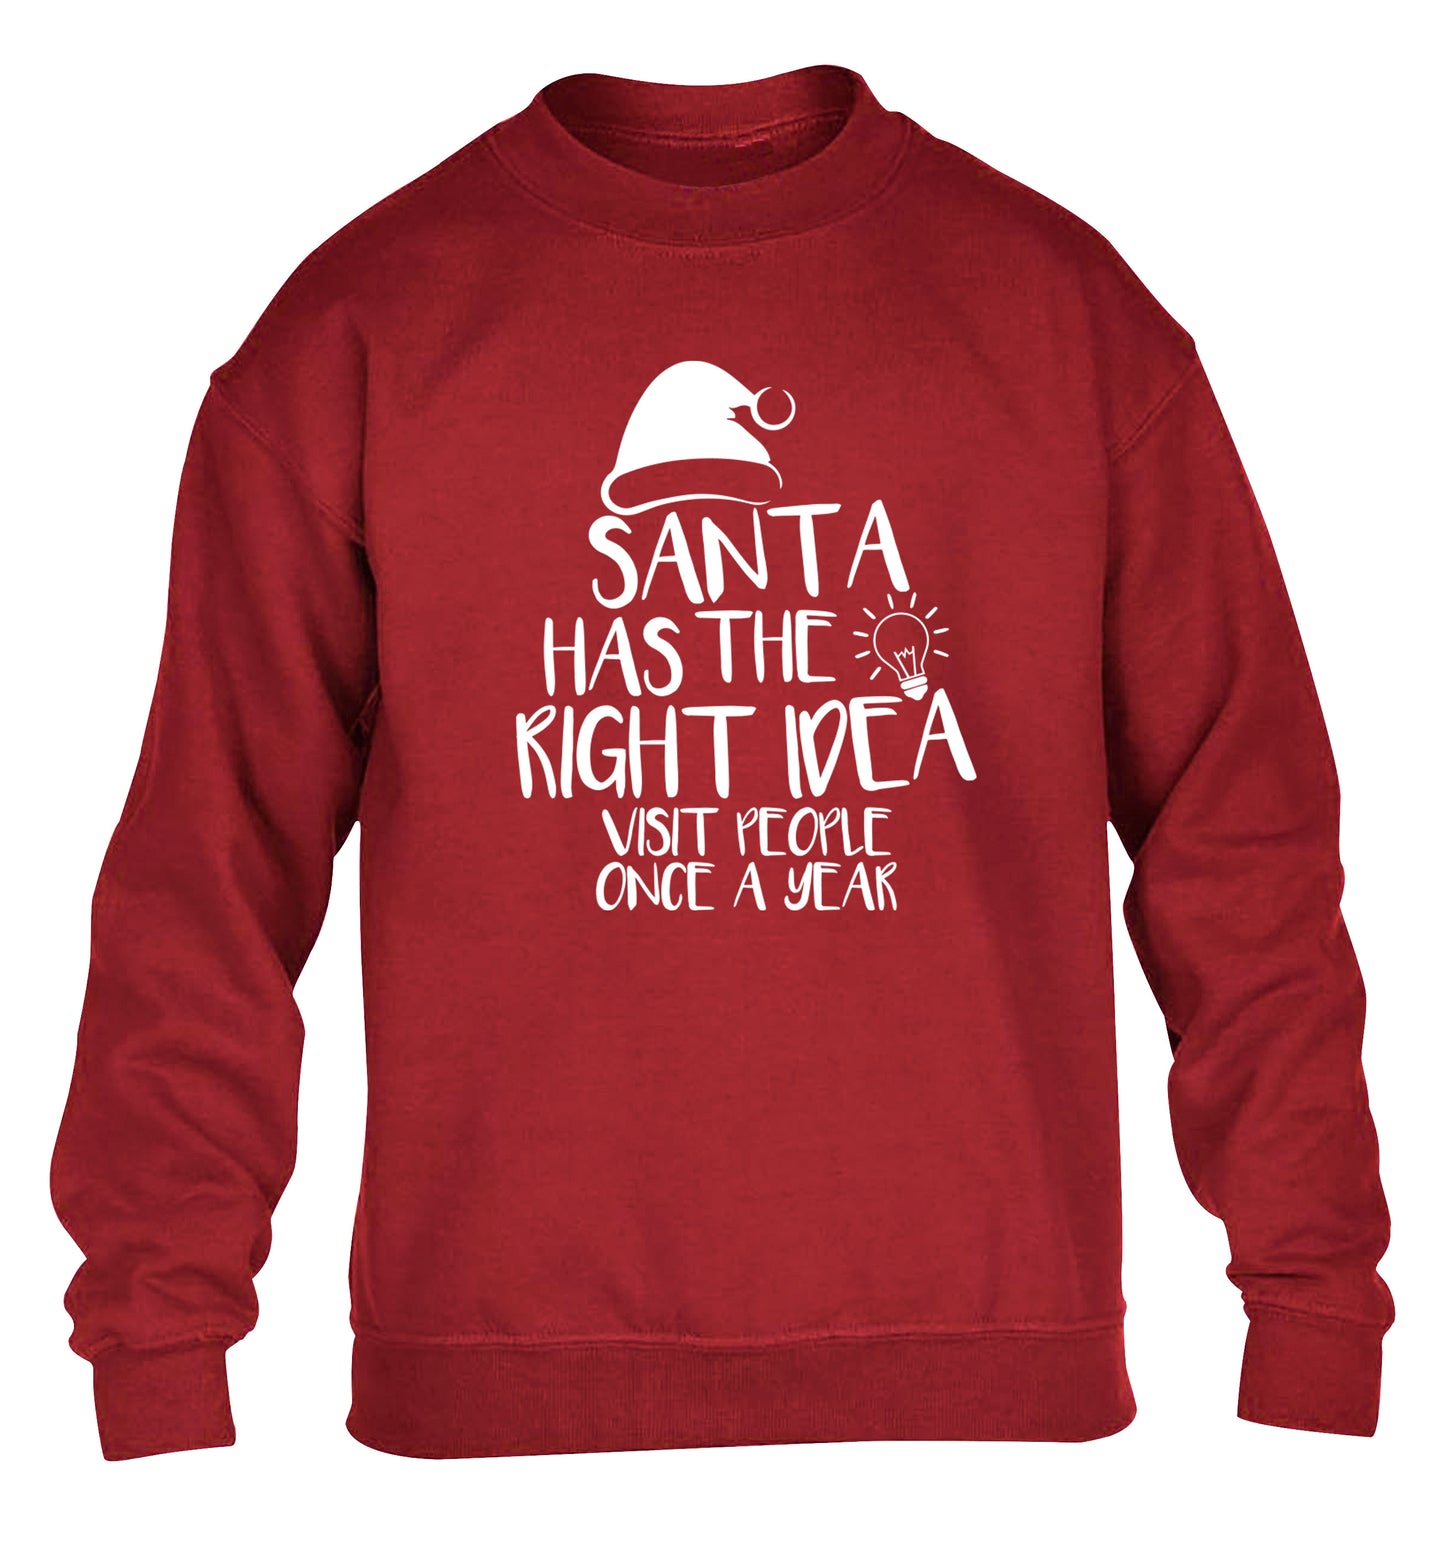 Santa has the right idea visit people once a year children's grey sweater 12-14 Years